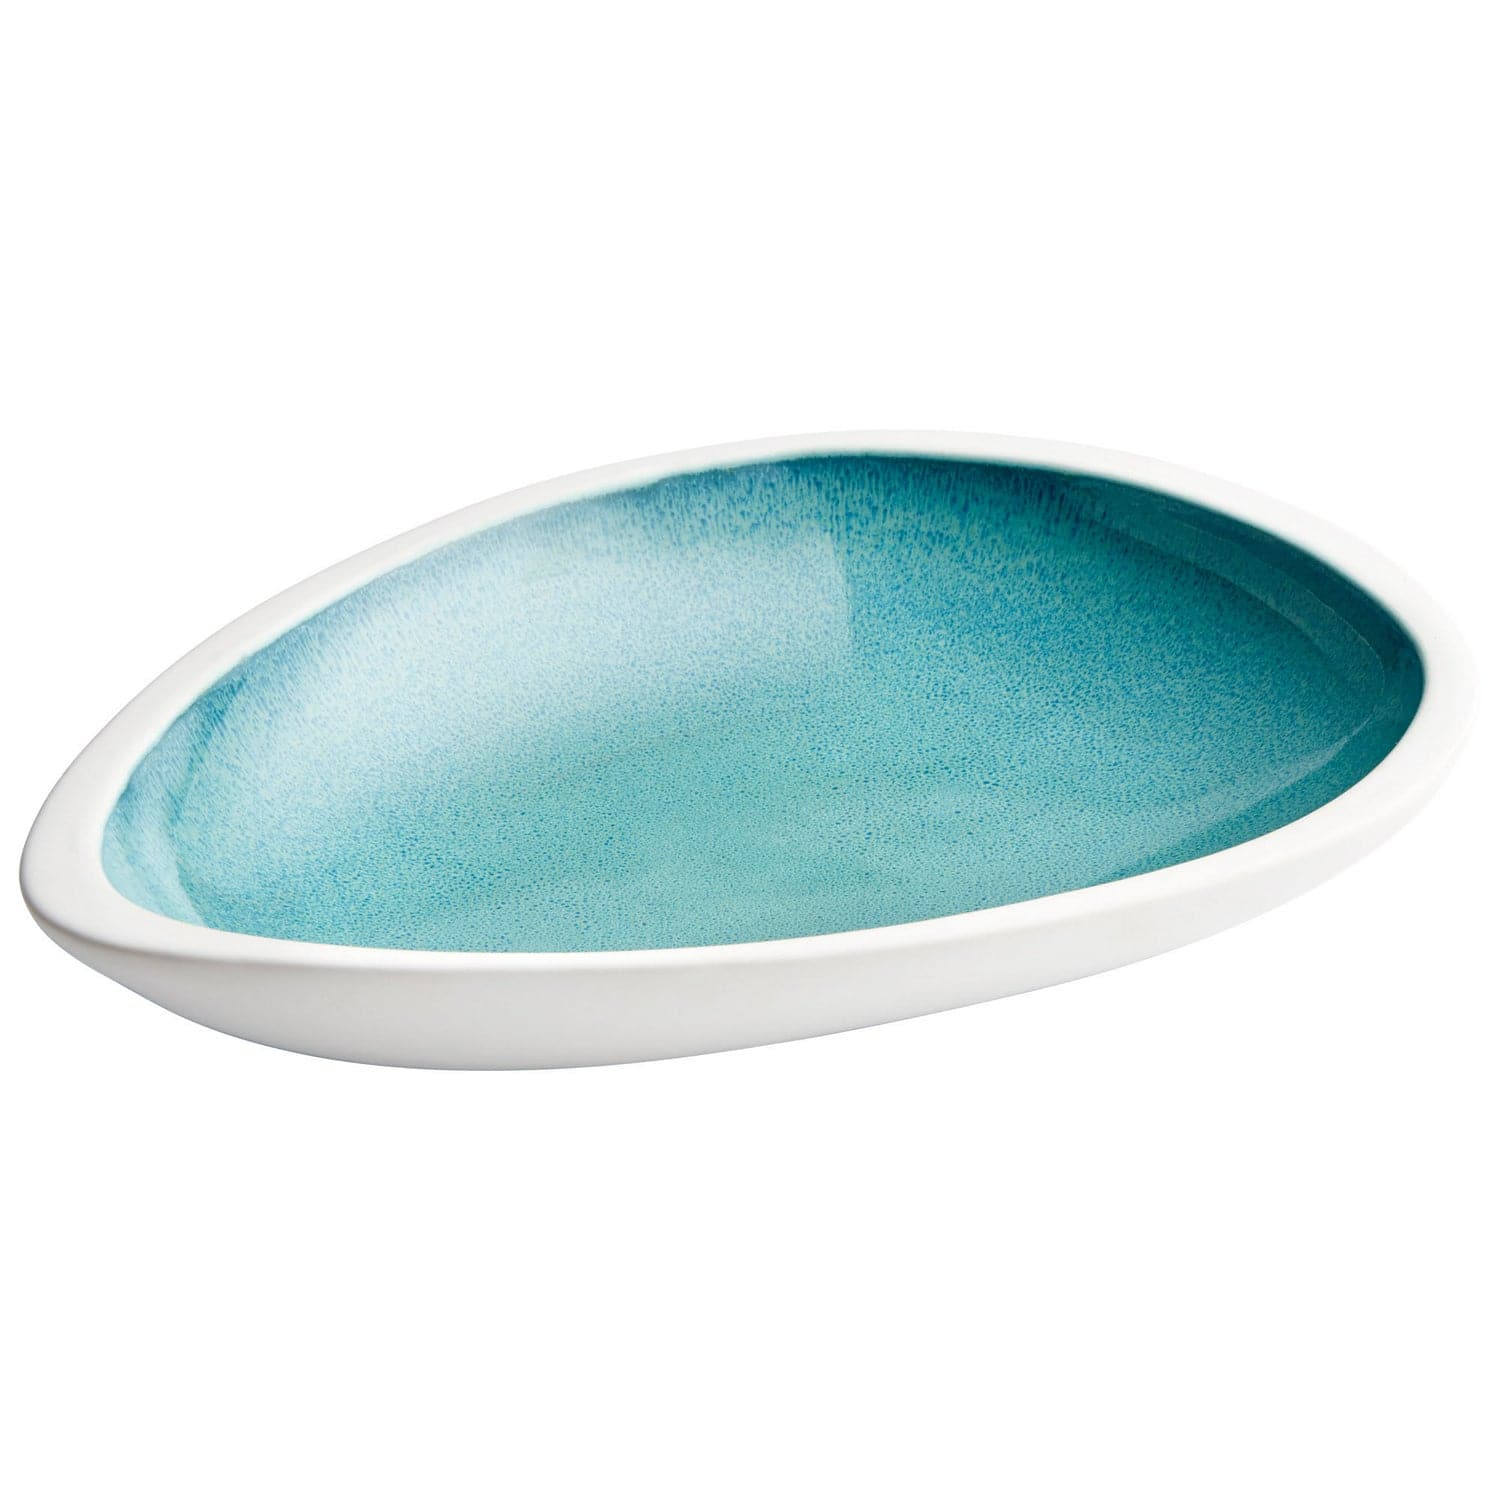 Cyan - 10260 - Tray - White And Green